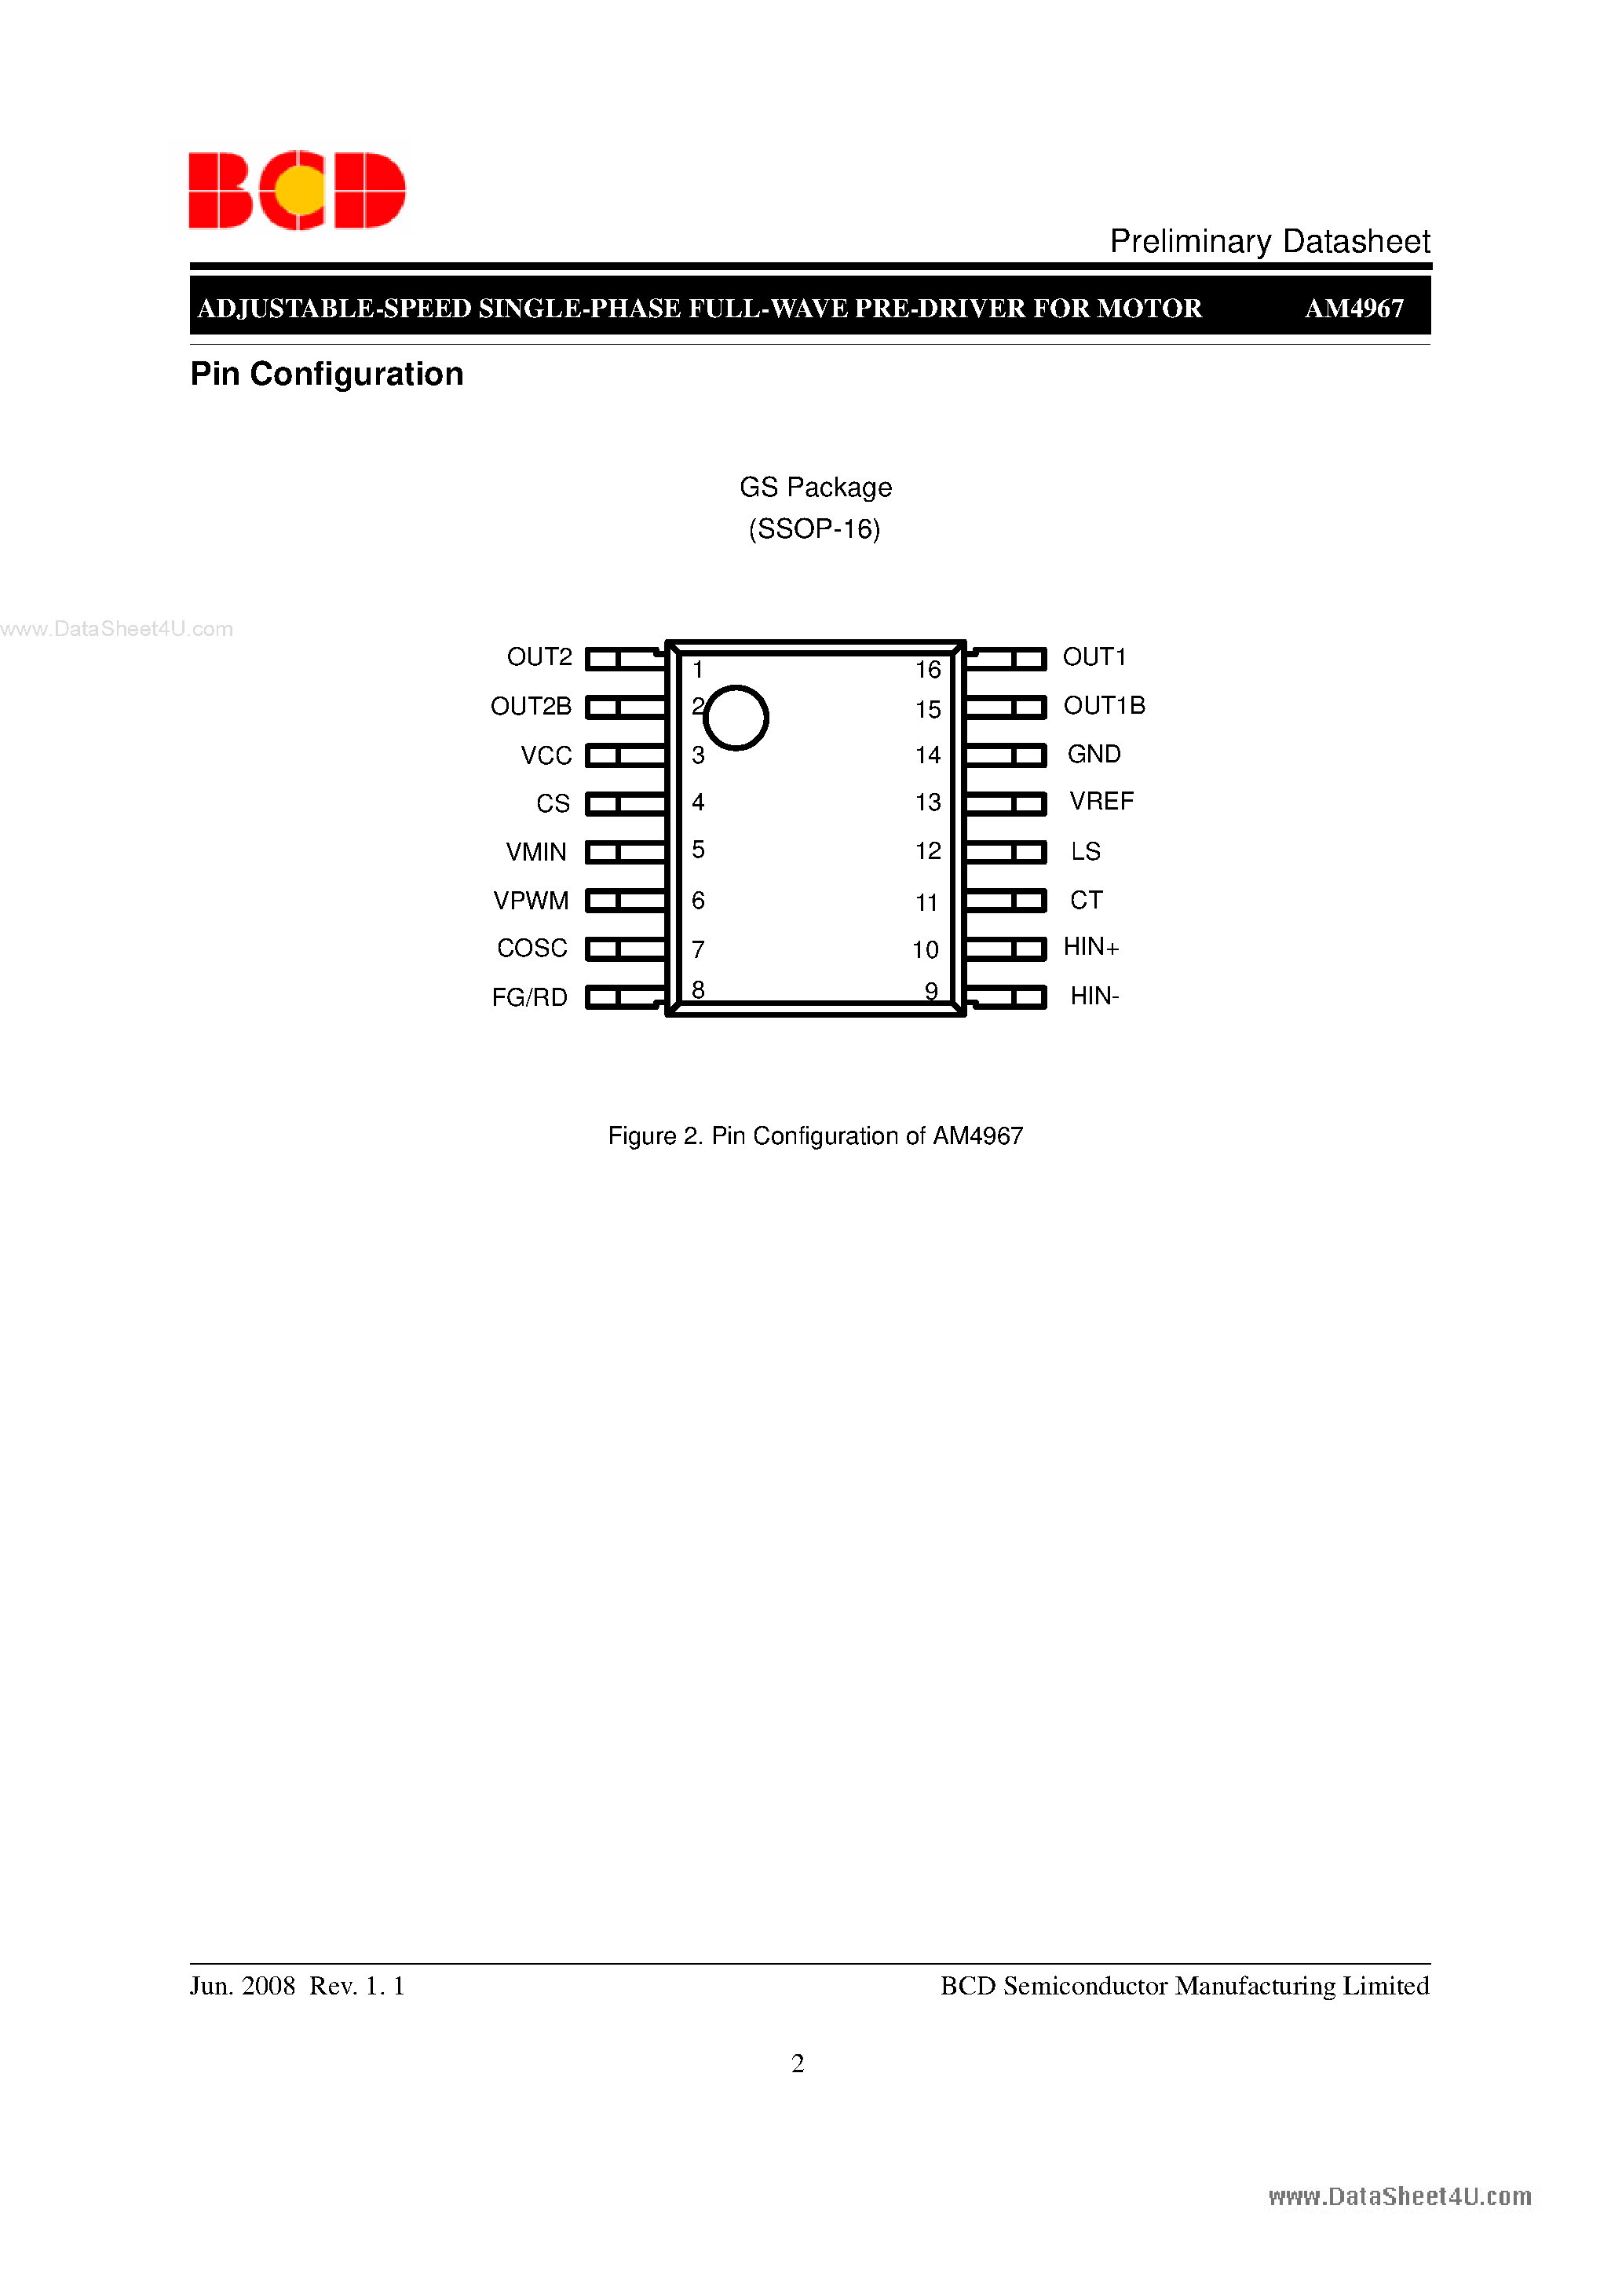 Datasheet AM4967 - ADJUSTABLE-SPEED SINGLE-PHASE FULL-WAVE PRE-DRIVER page 2